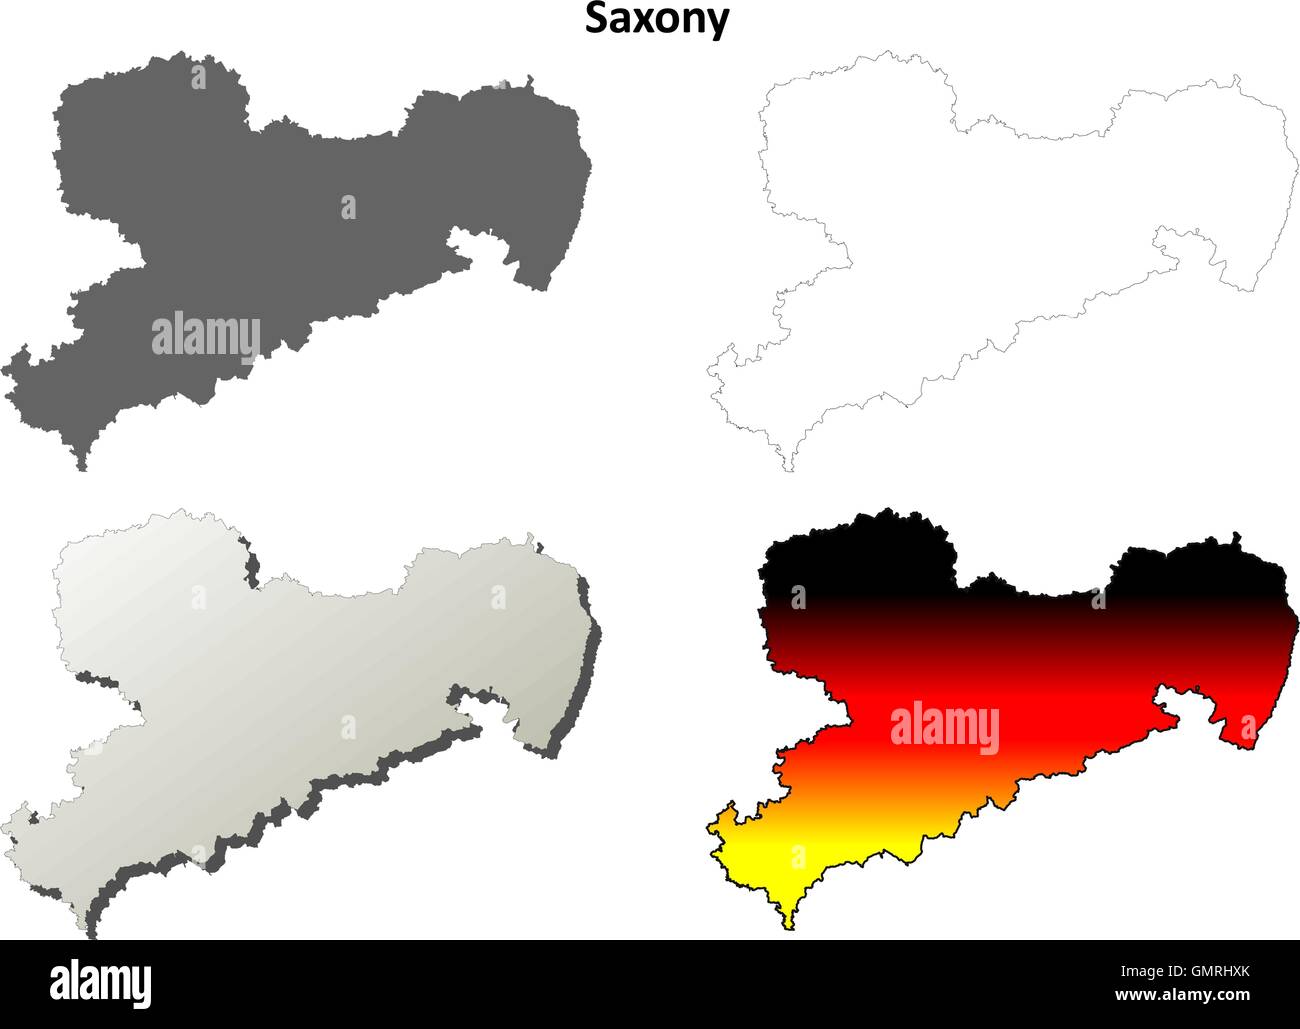 Saxony blank outline map set Stock Vector